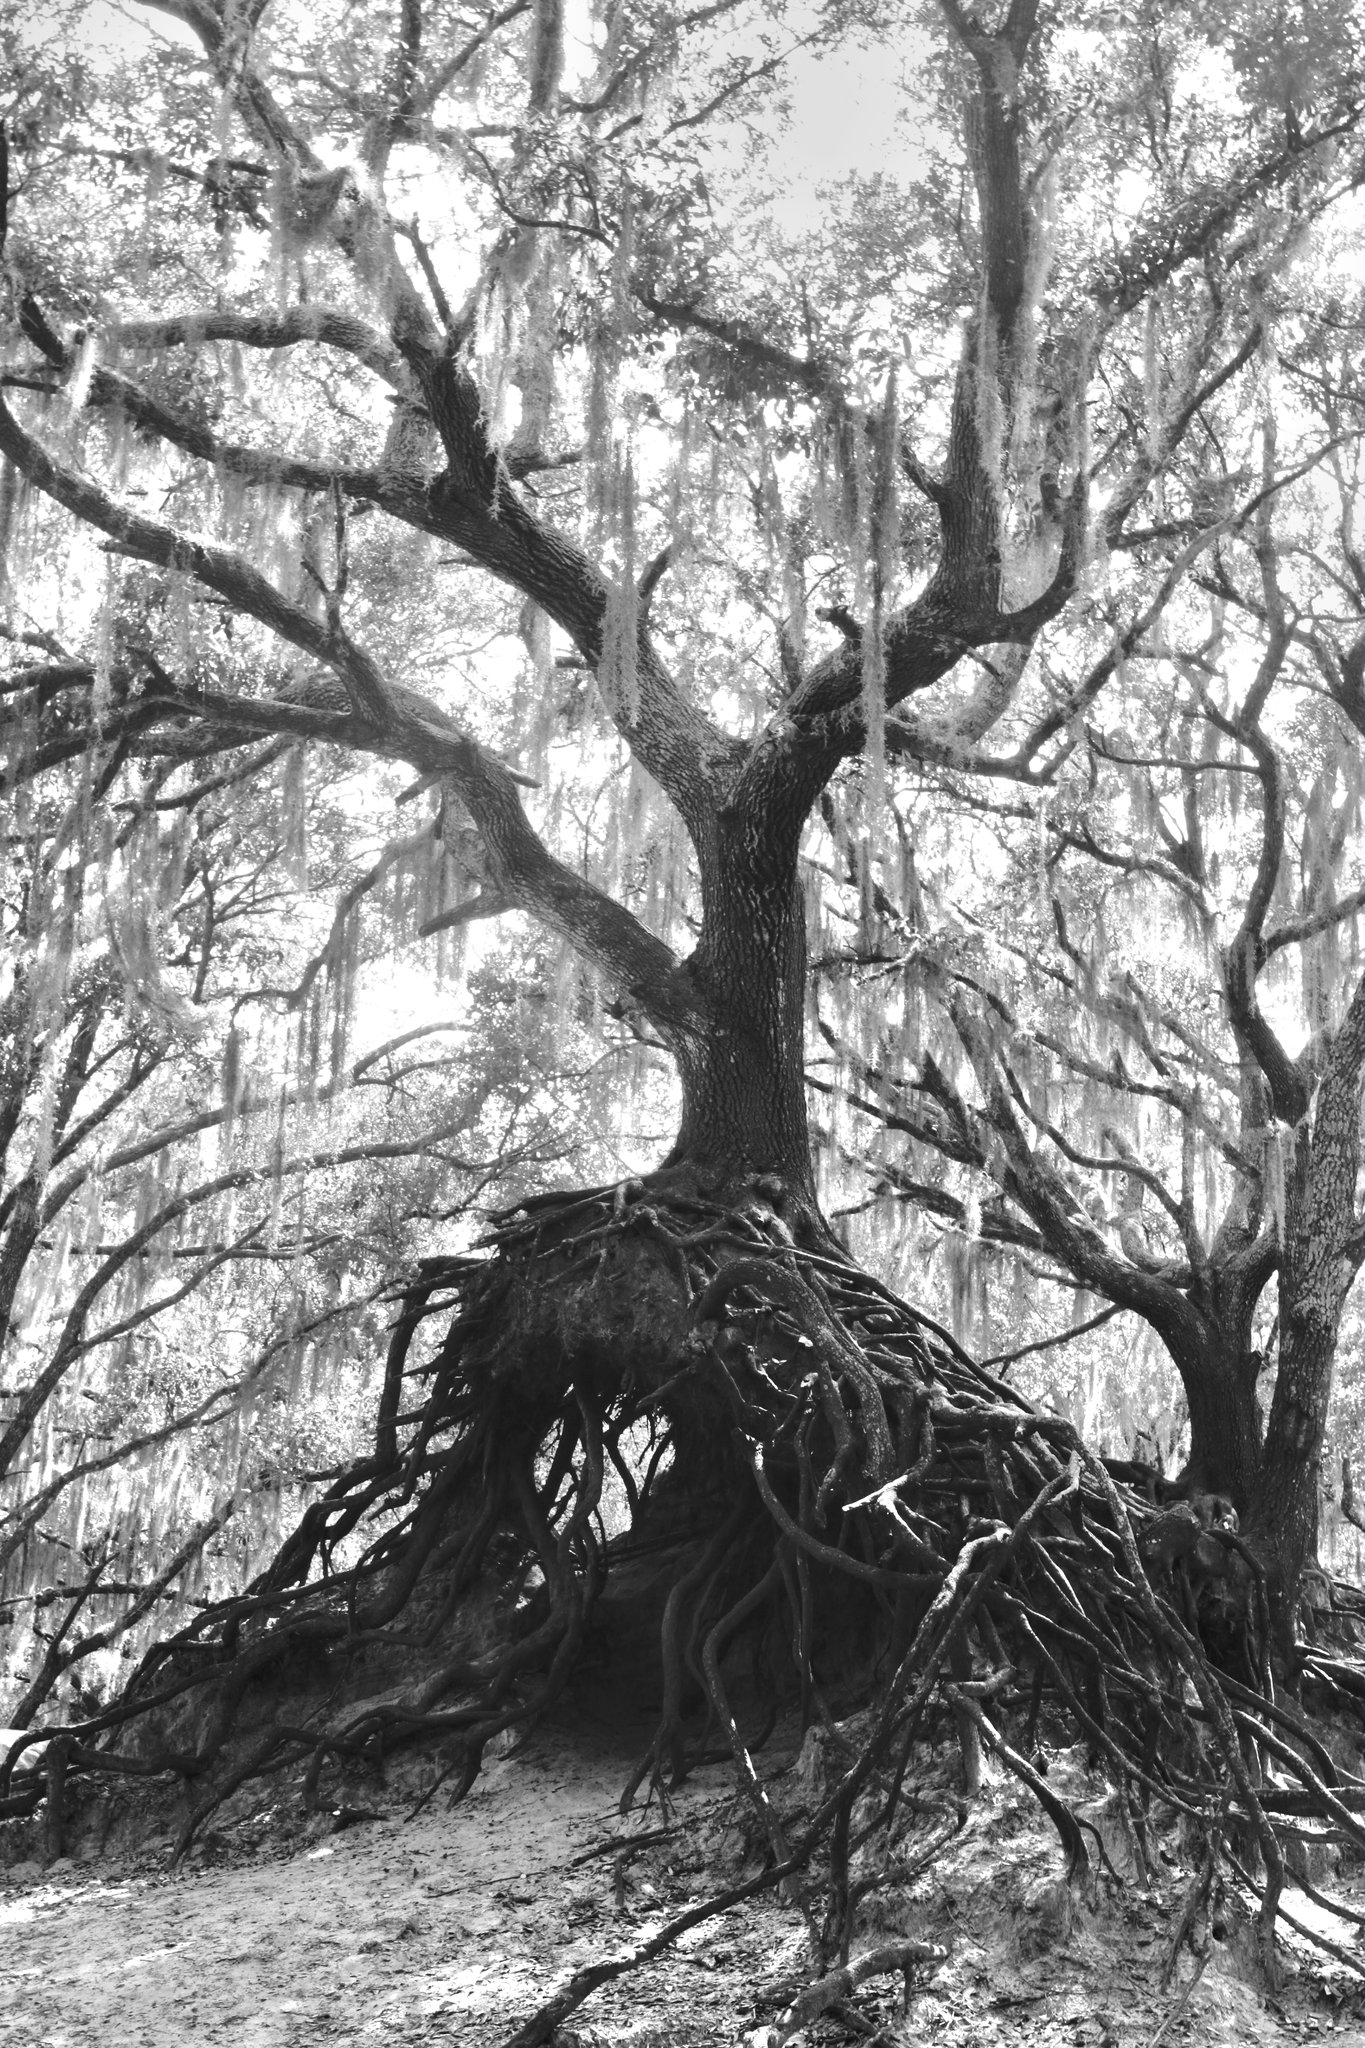 Wordless Wednesday – The Old Tree